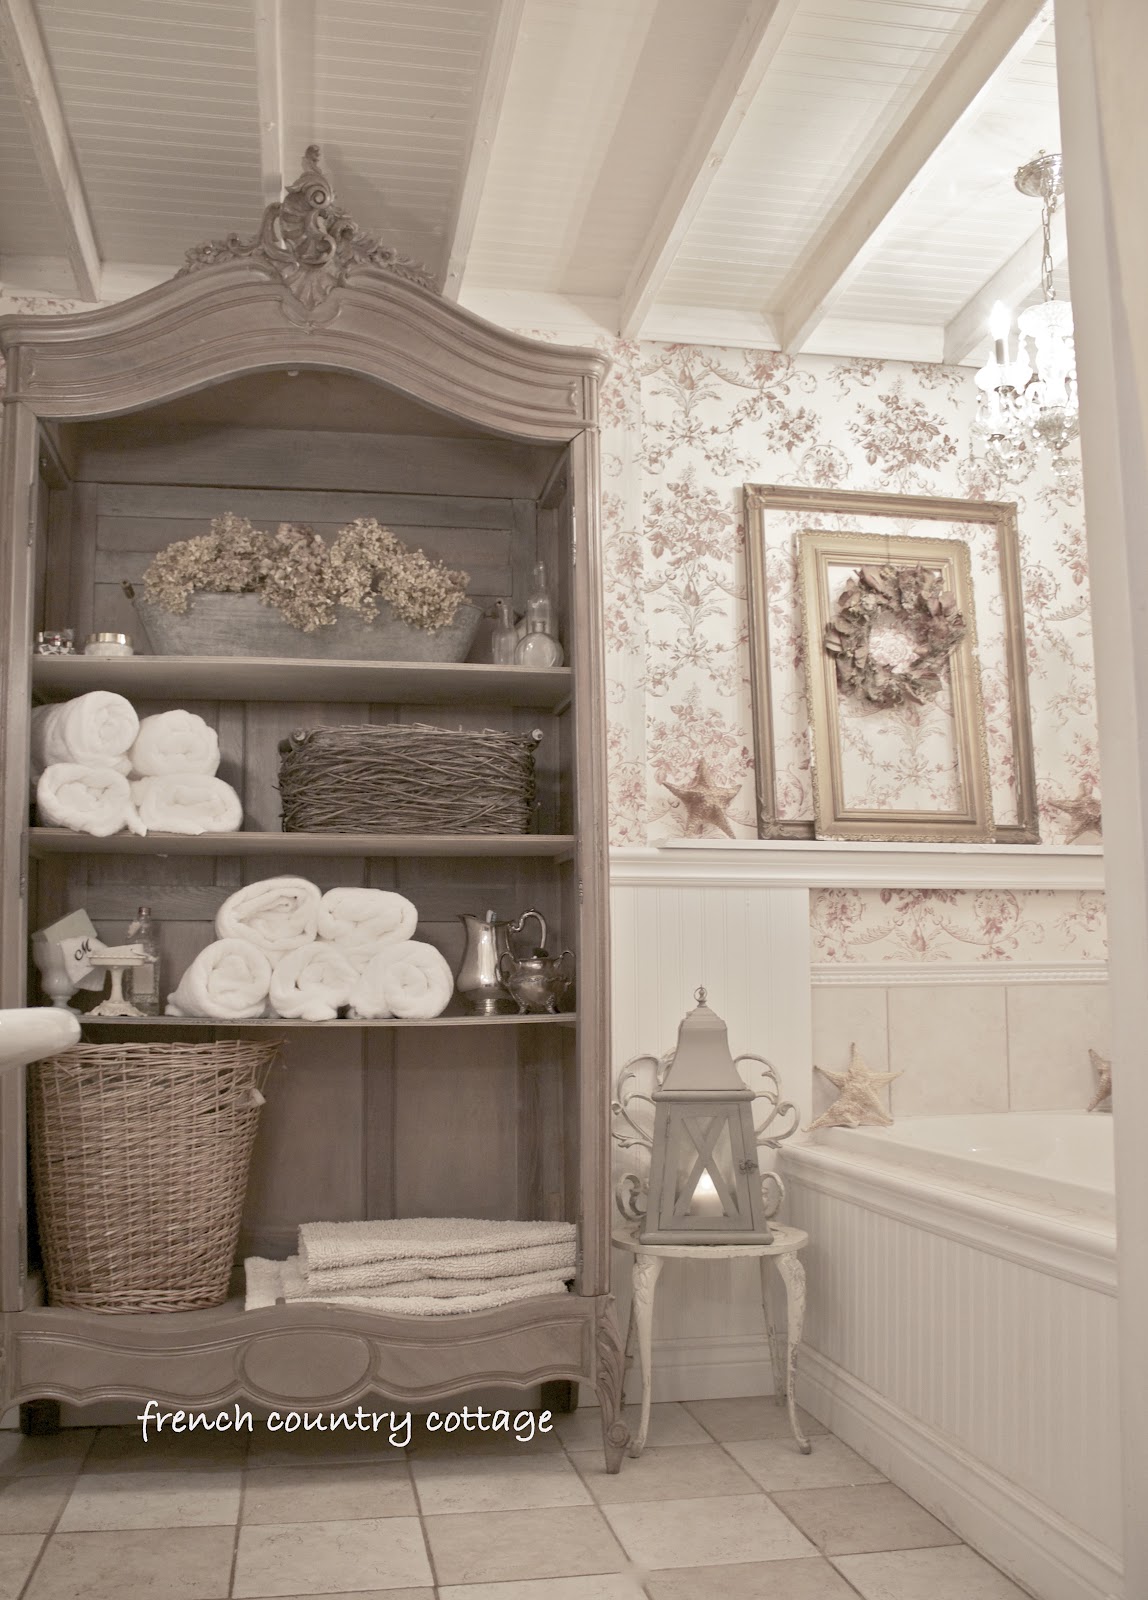 French Country Cottage Bathroom Inspirations